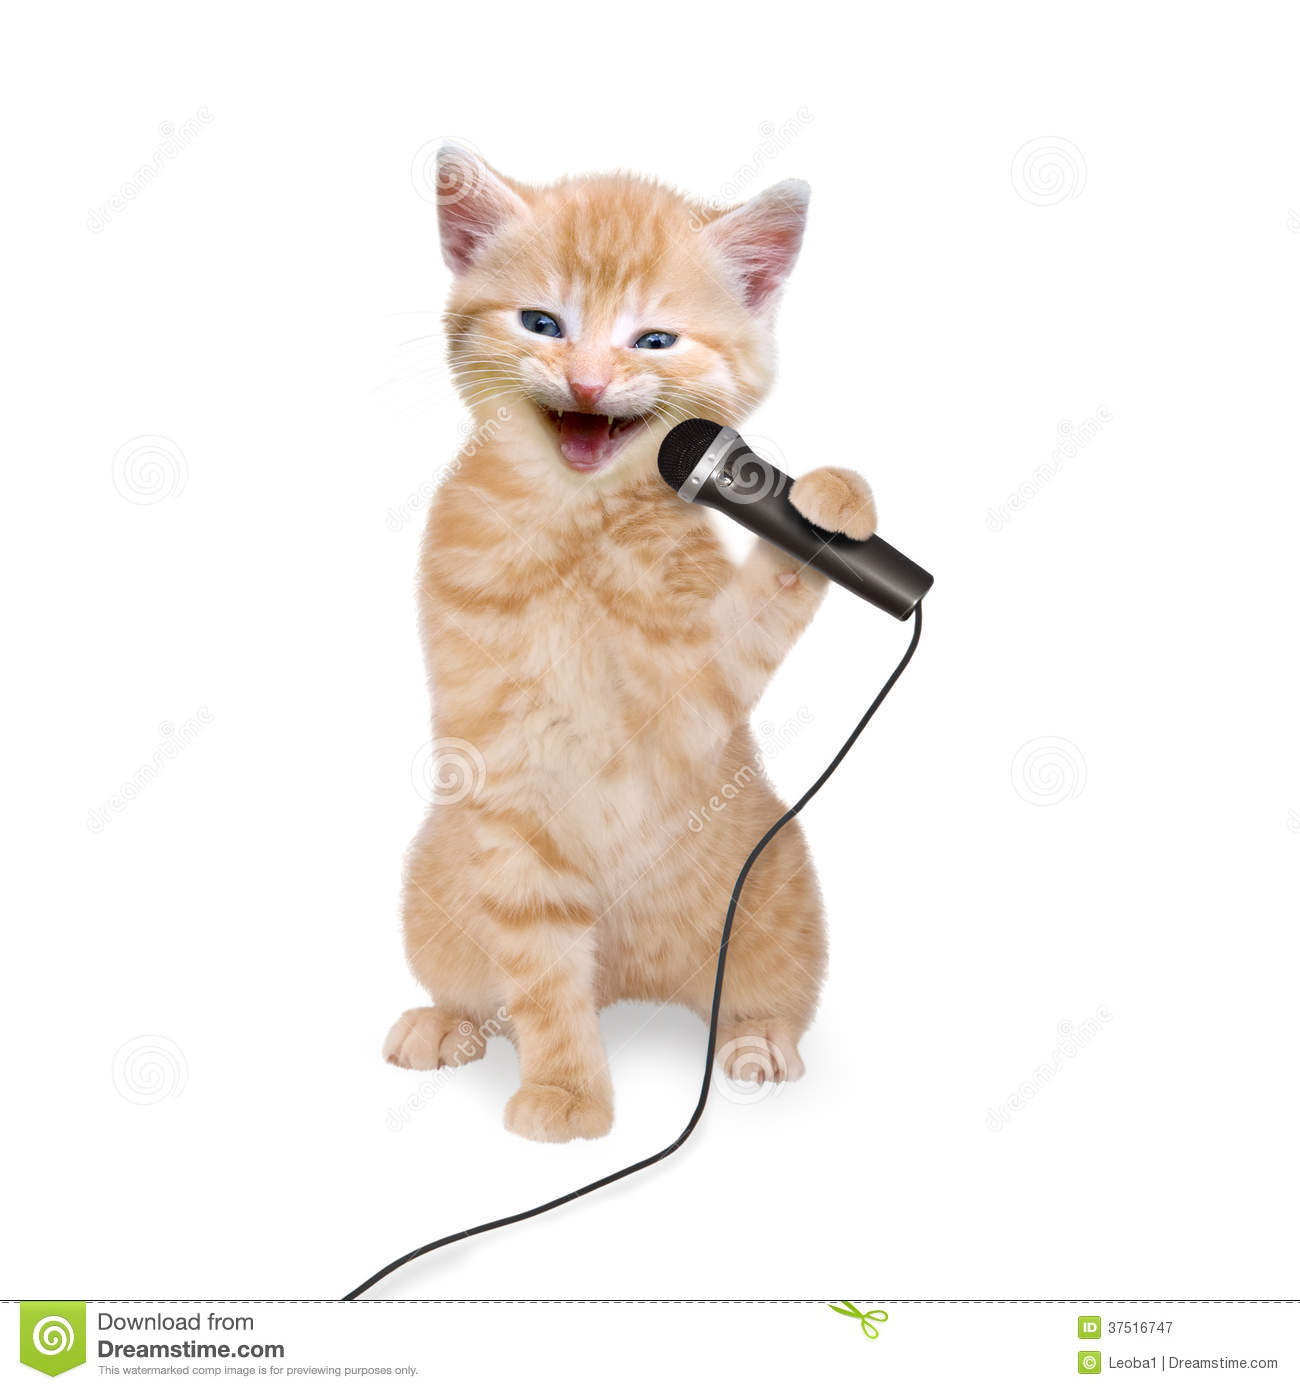 Cat Kitten Singing Into Microphone On White Background